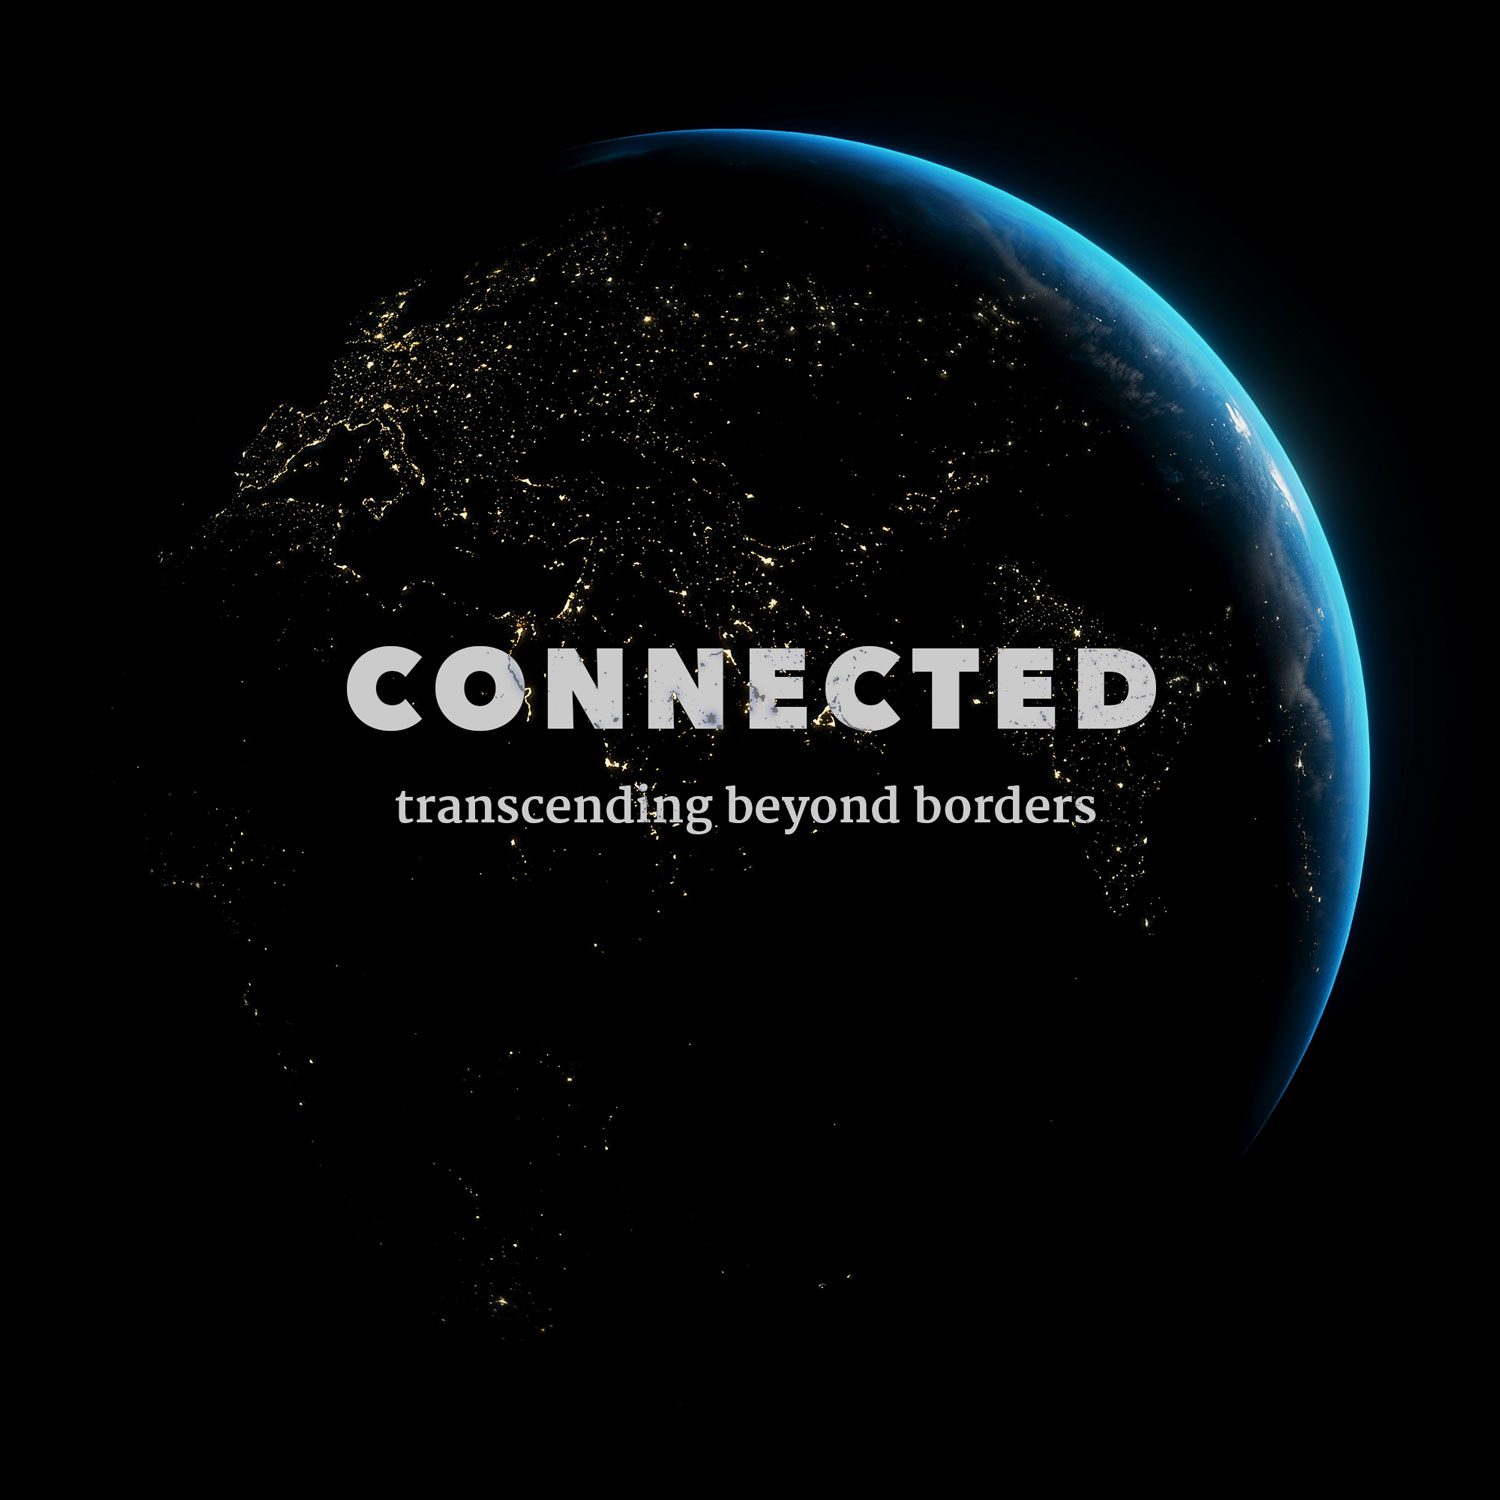 🌏 CONNECTED – transcending beyond borders